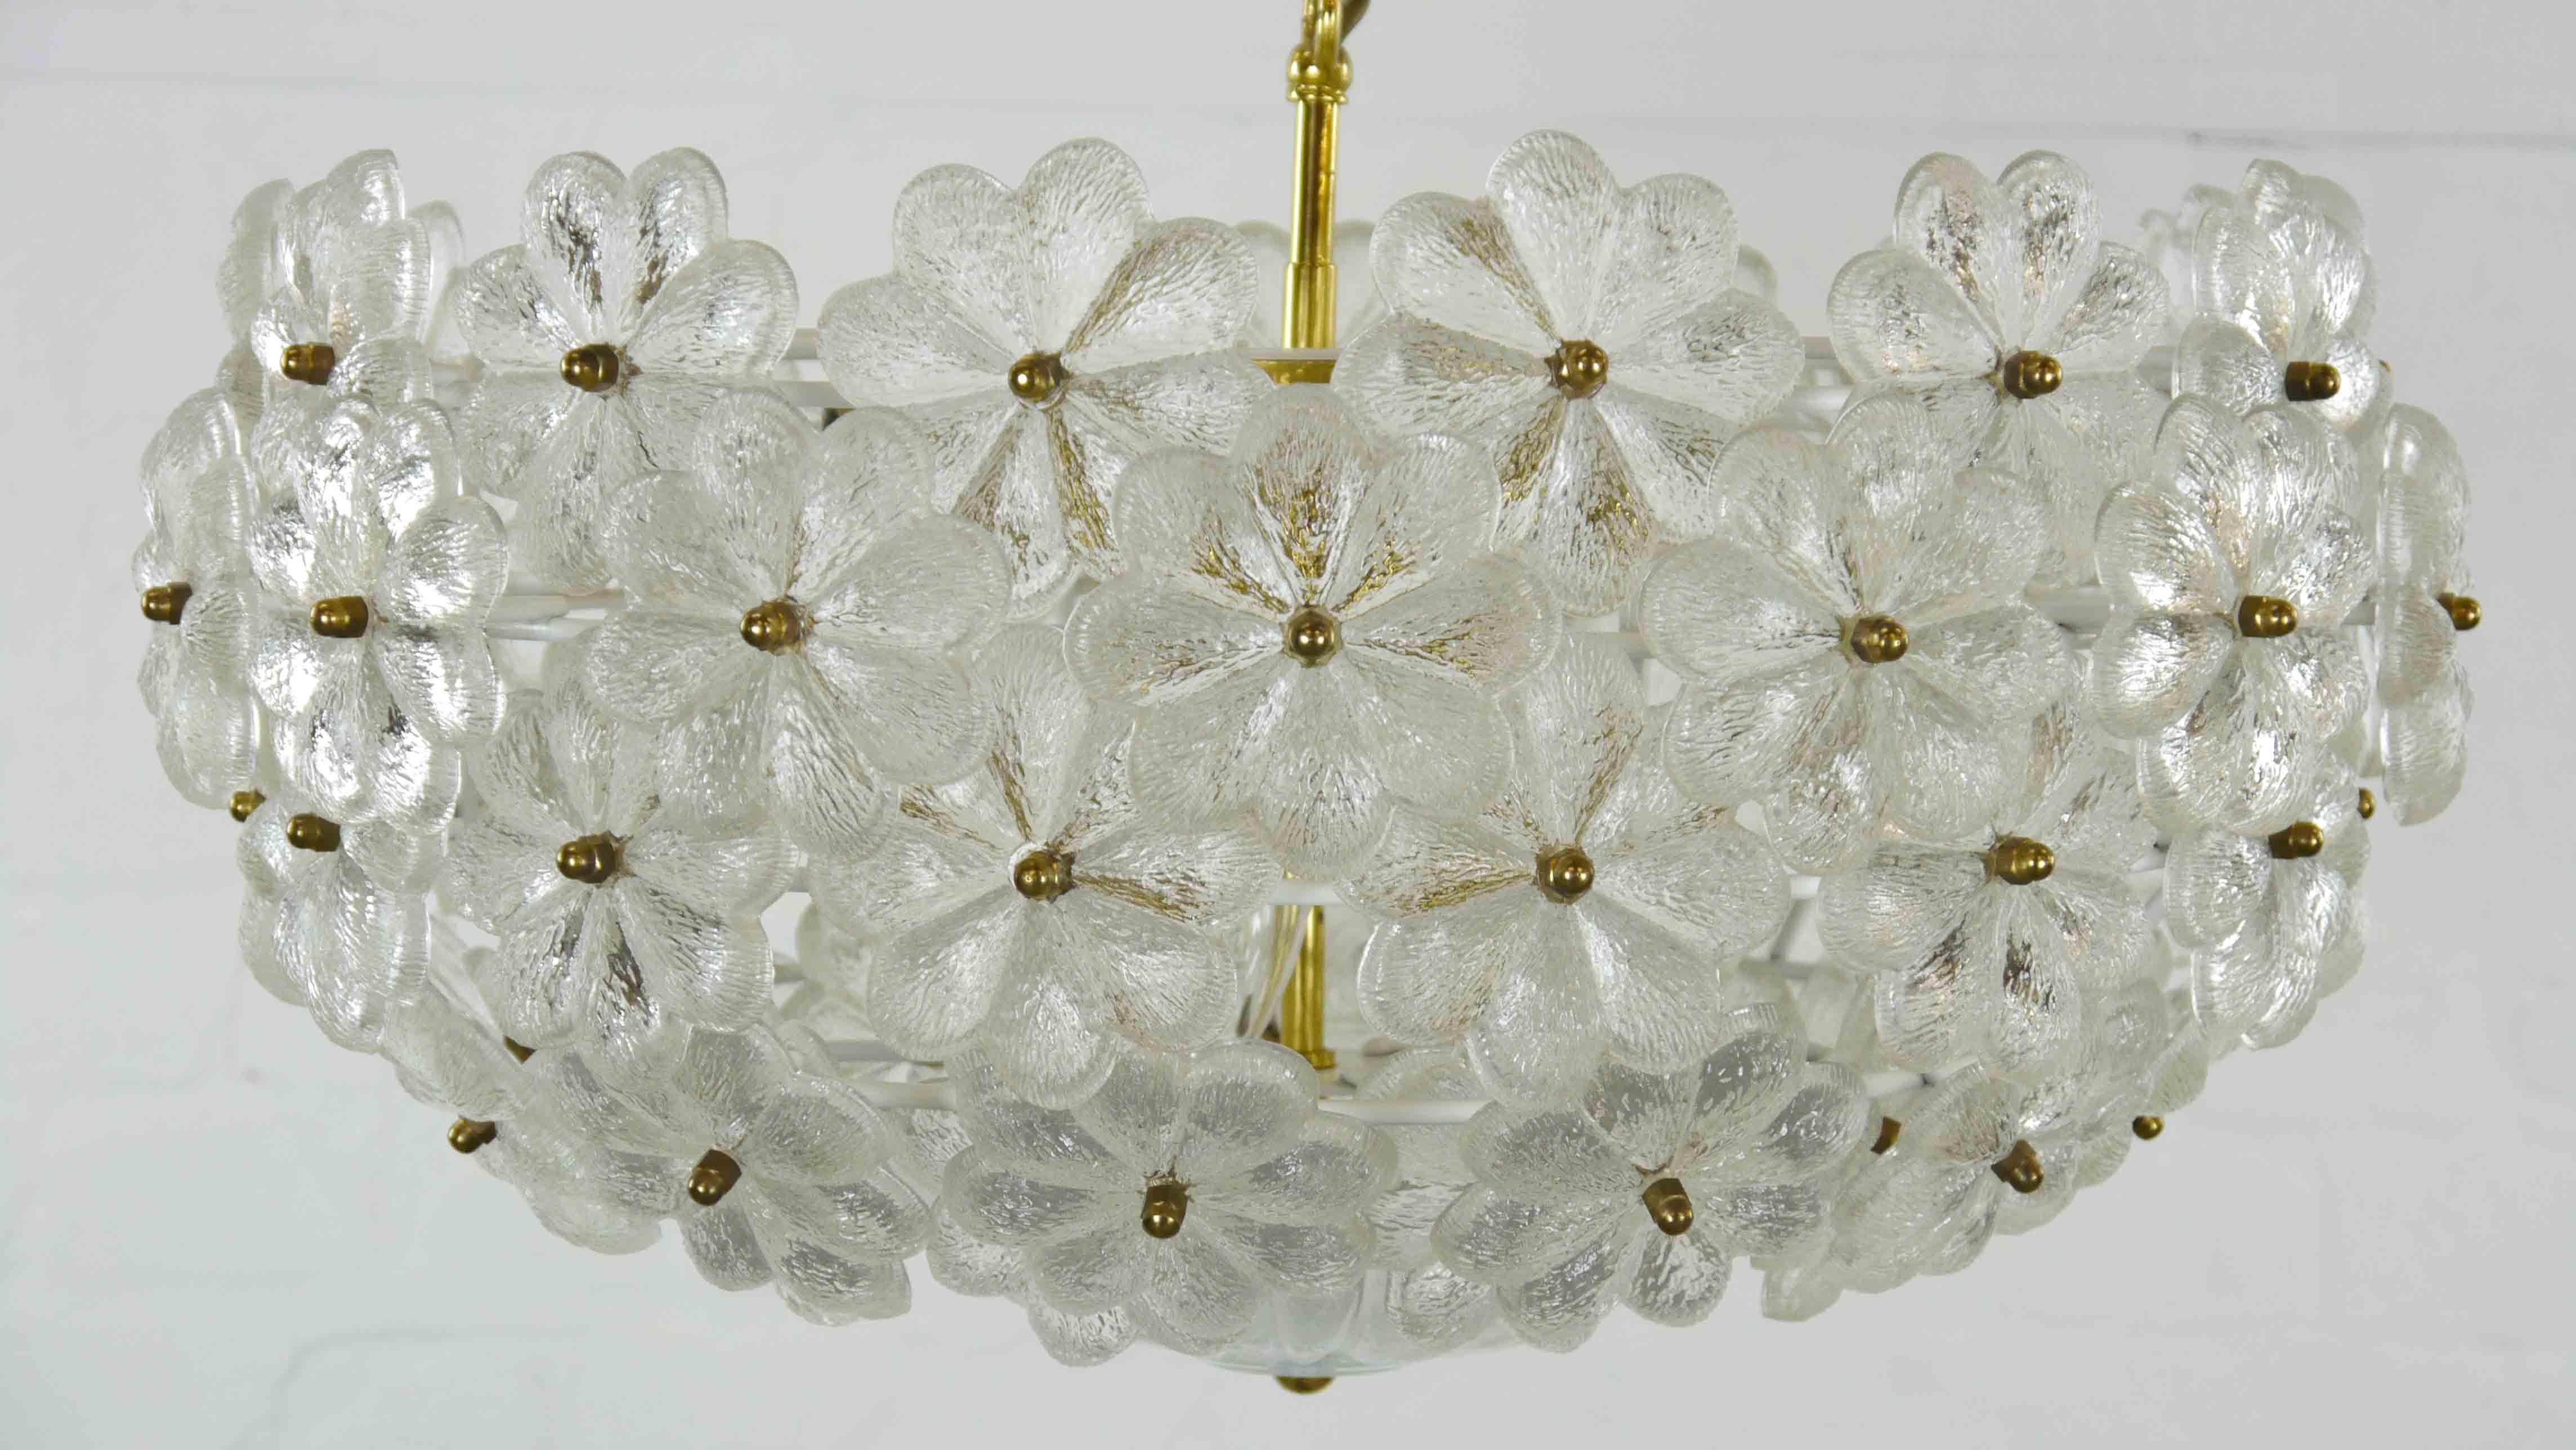 German Midcentury Large and Stunning Glass Chandelier by Ernst Palme Glassflowers 60s 